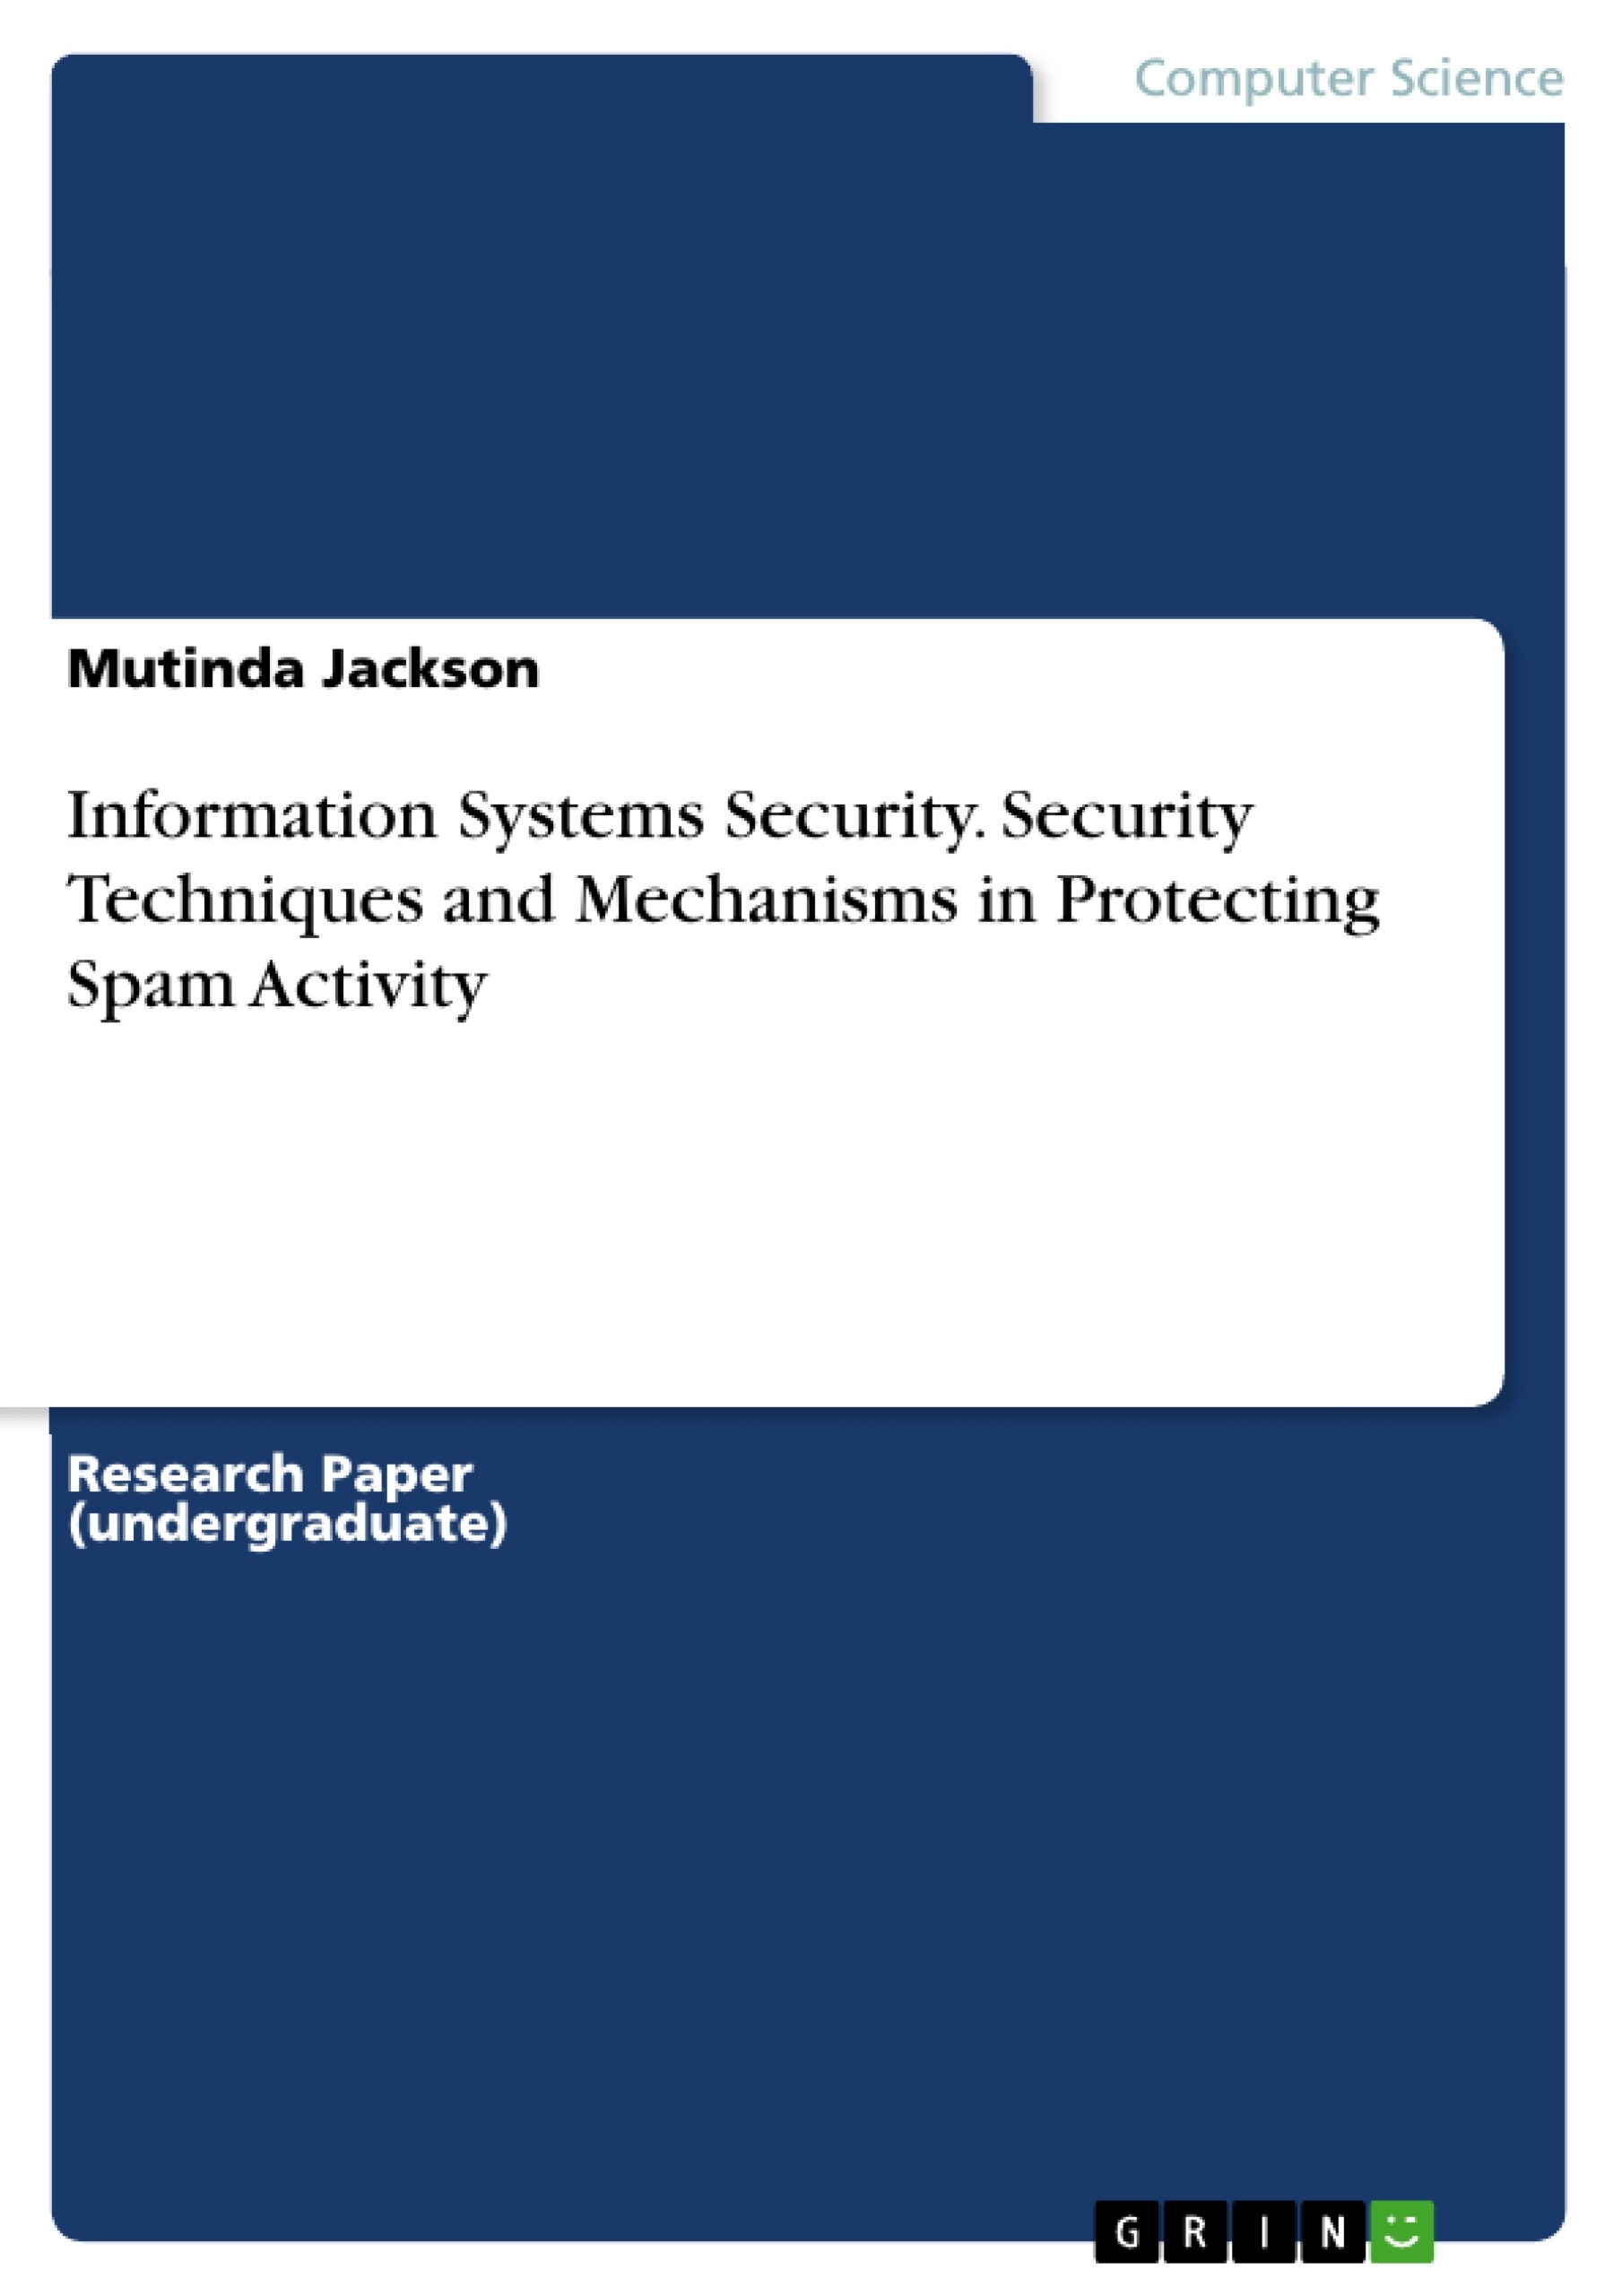 Title: Information Systems Security. Security Techniques and Mechanisms in Protecting Spam Activity